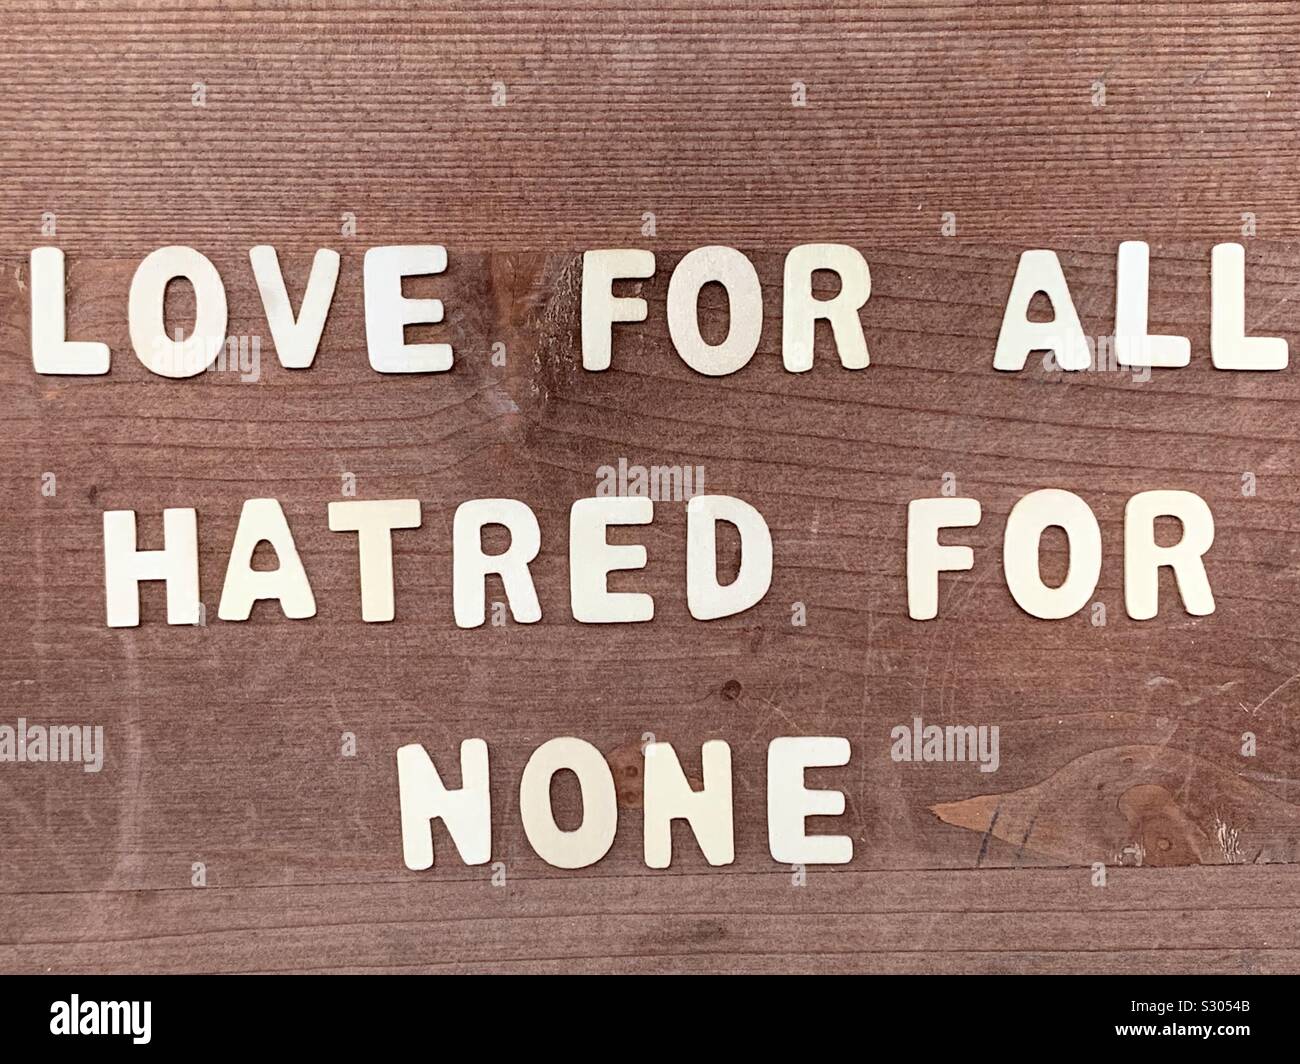 Love for all, hatred for none, peace quote phrase composed with wooden letters Stock Photo